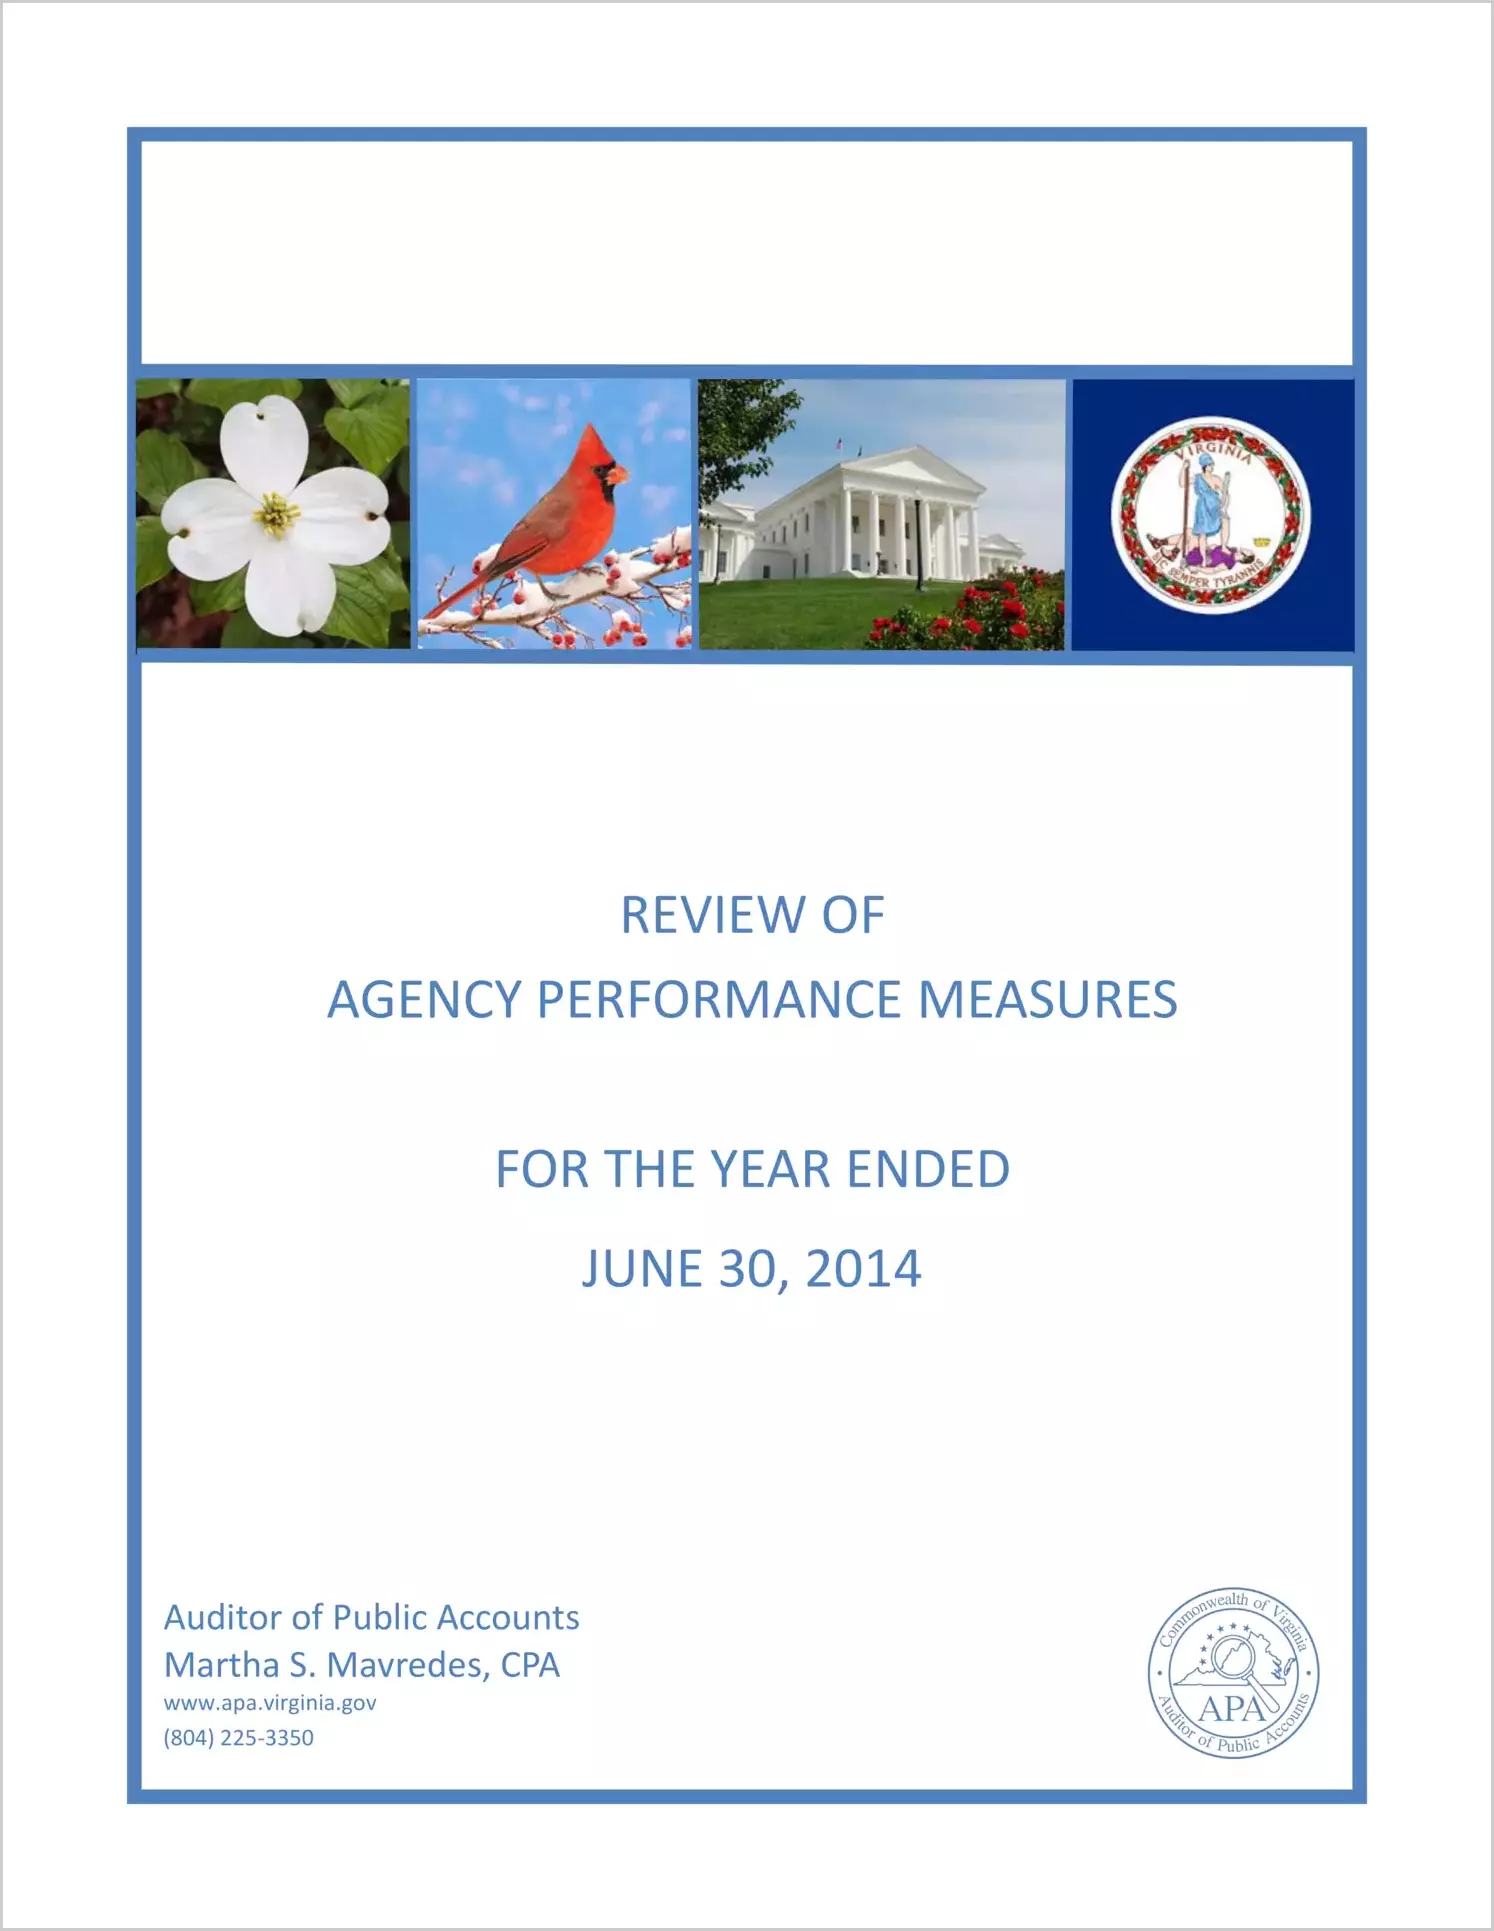 Review of Agency Performance Measures Report for the year ended June 30, 2014